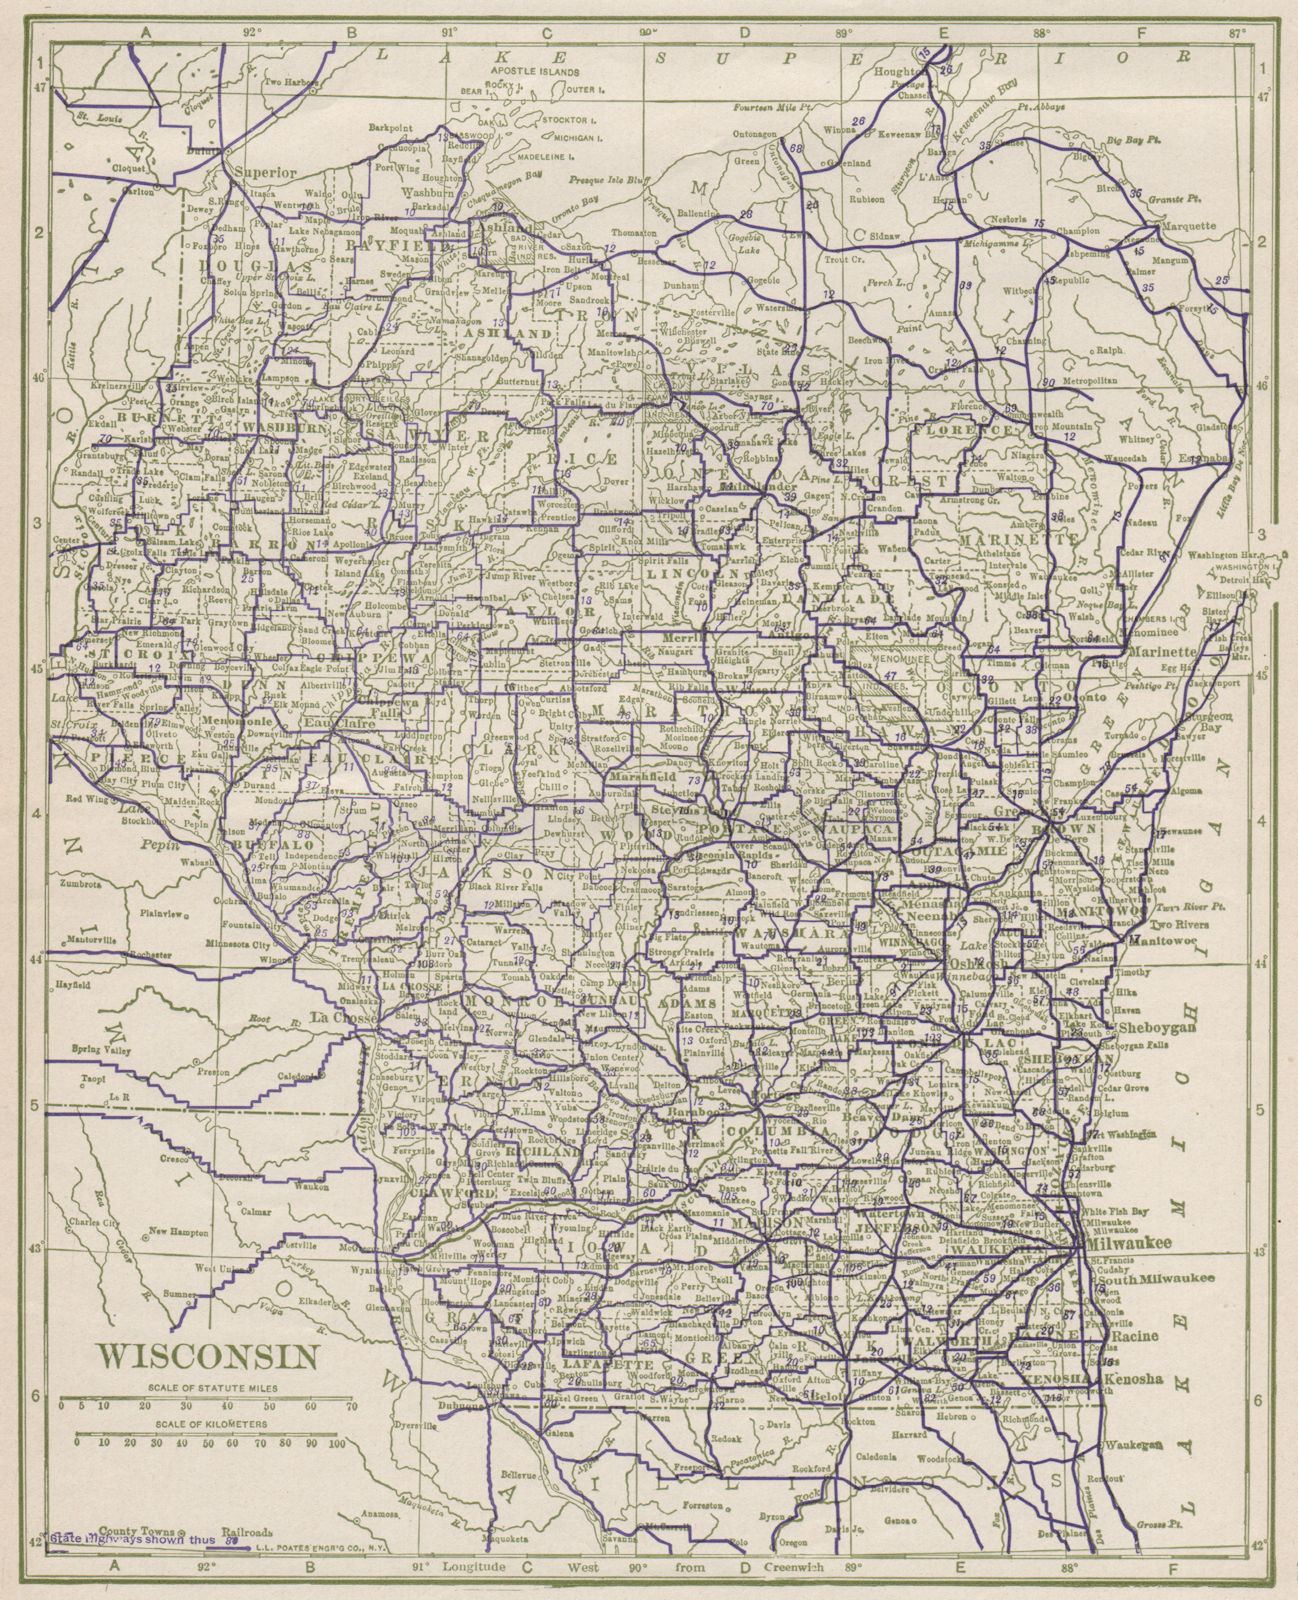 Wisconsin State Highways. POATES 1925 old vintage map plan chart